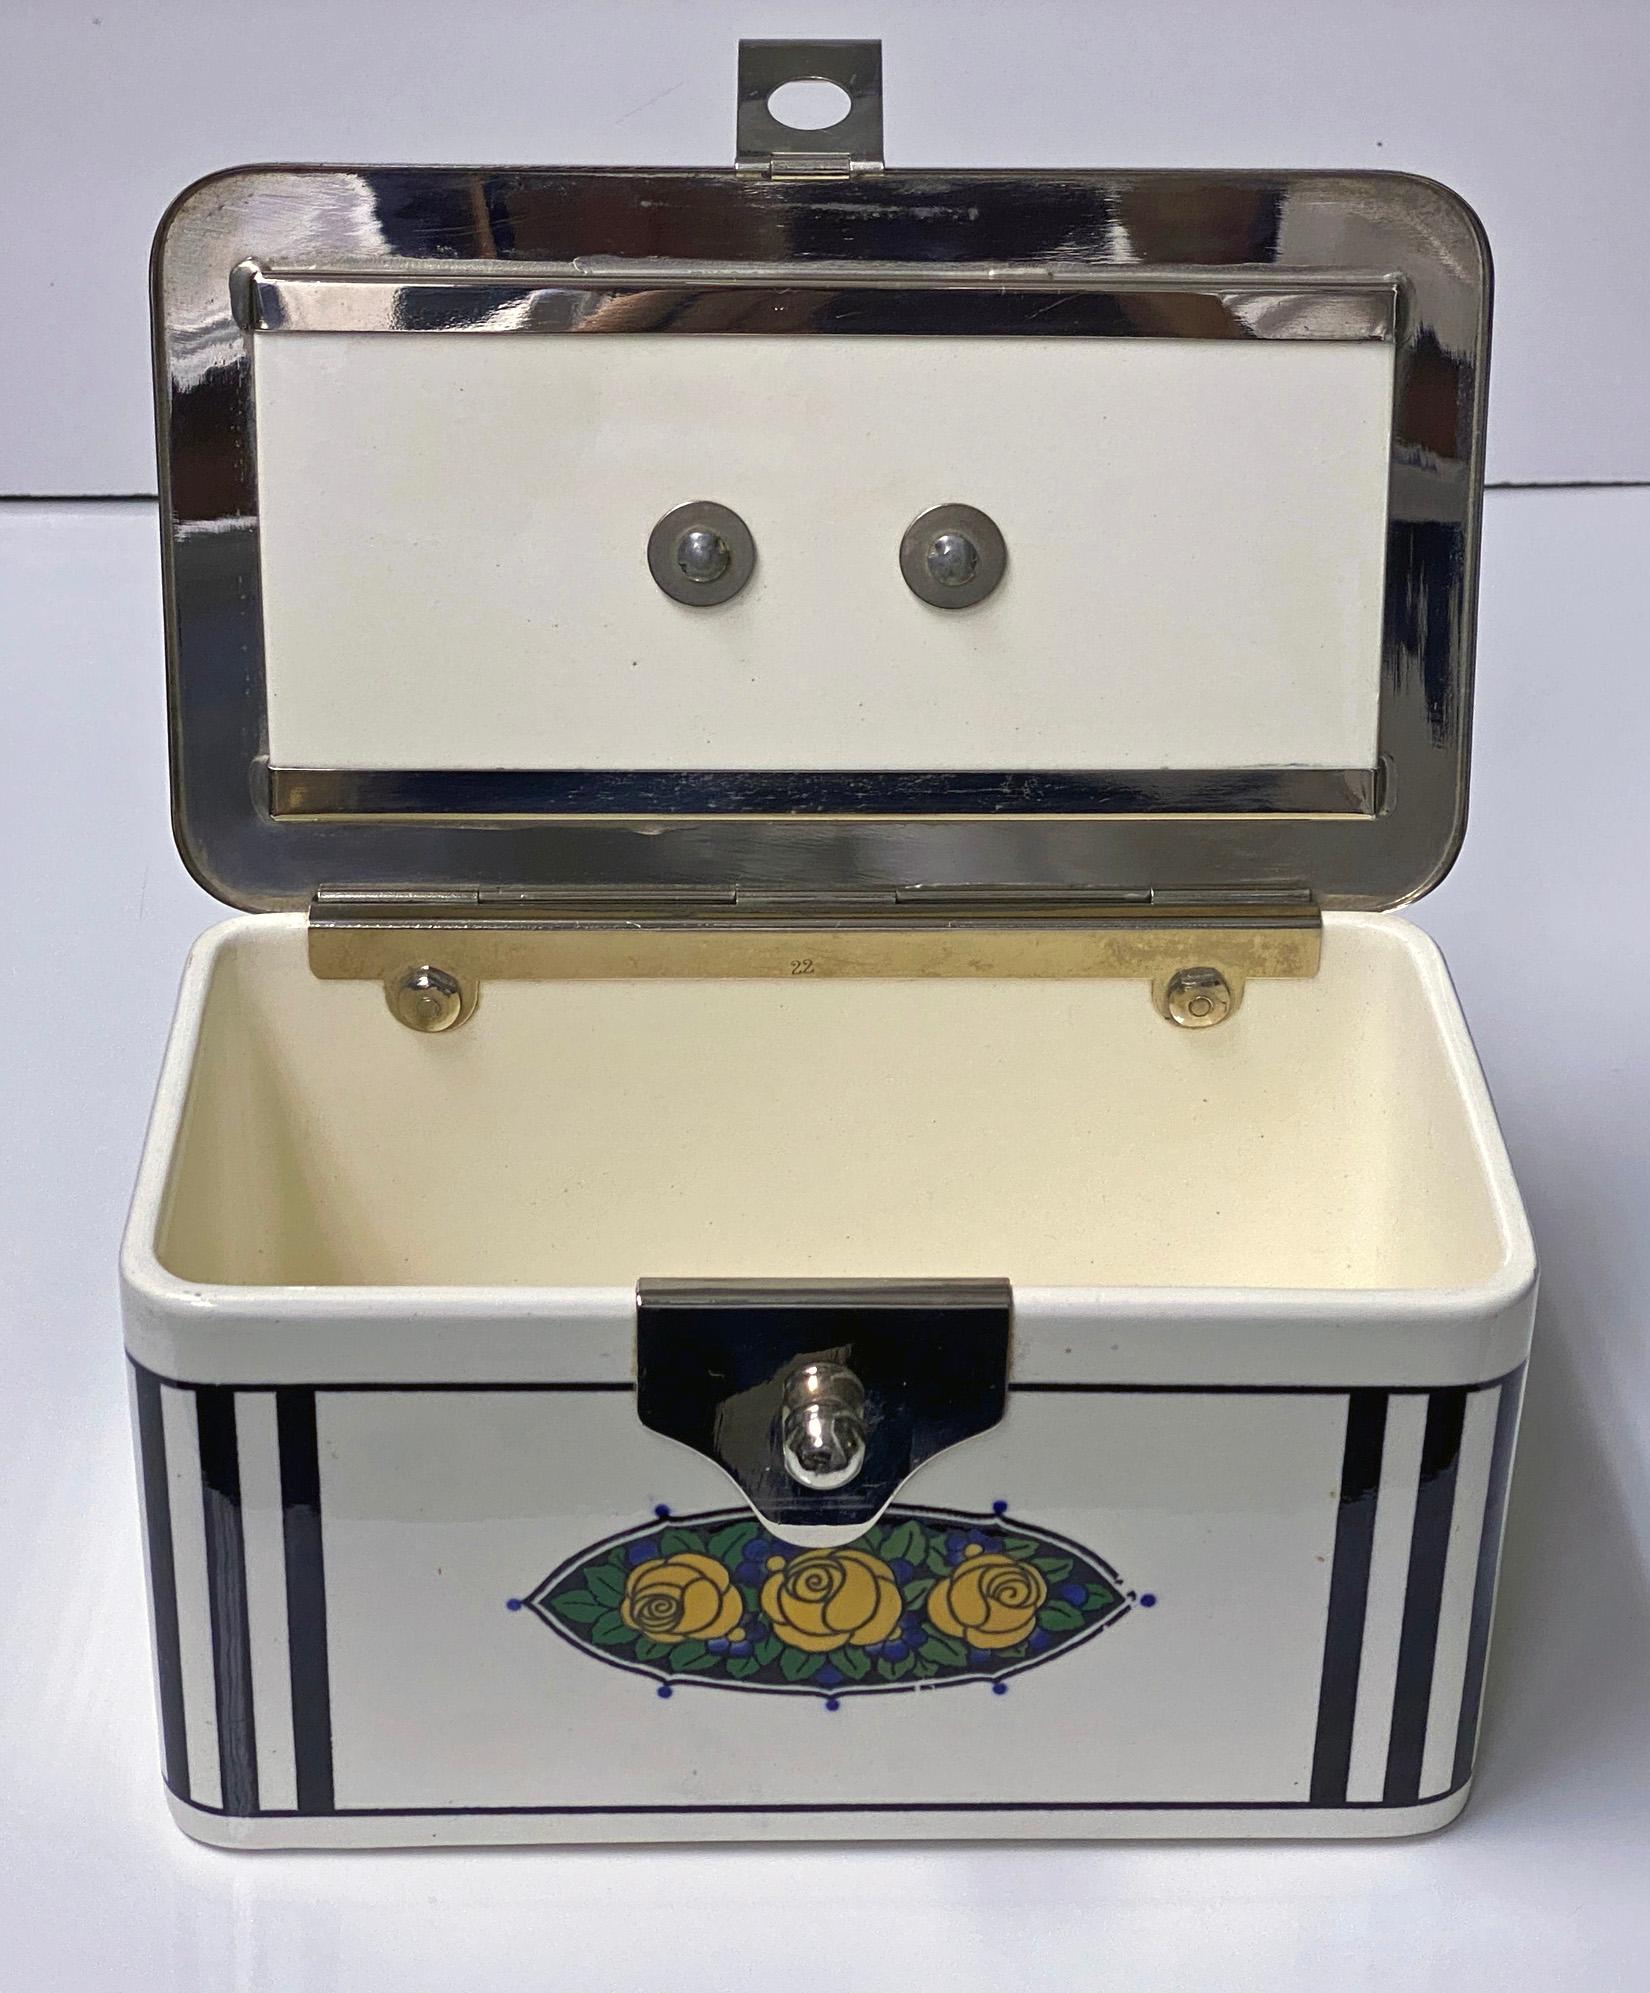 Art Deco WMF and Wachtersbach ceramic Jugendstil Arts & Crafts rose pattern lunch sandwich hasp lock box. Designed by Christian Neureuther & Joseph Olbrich, circa 1910. The box with wonderful yellow, green and deep violet cartouche design surround